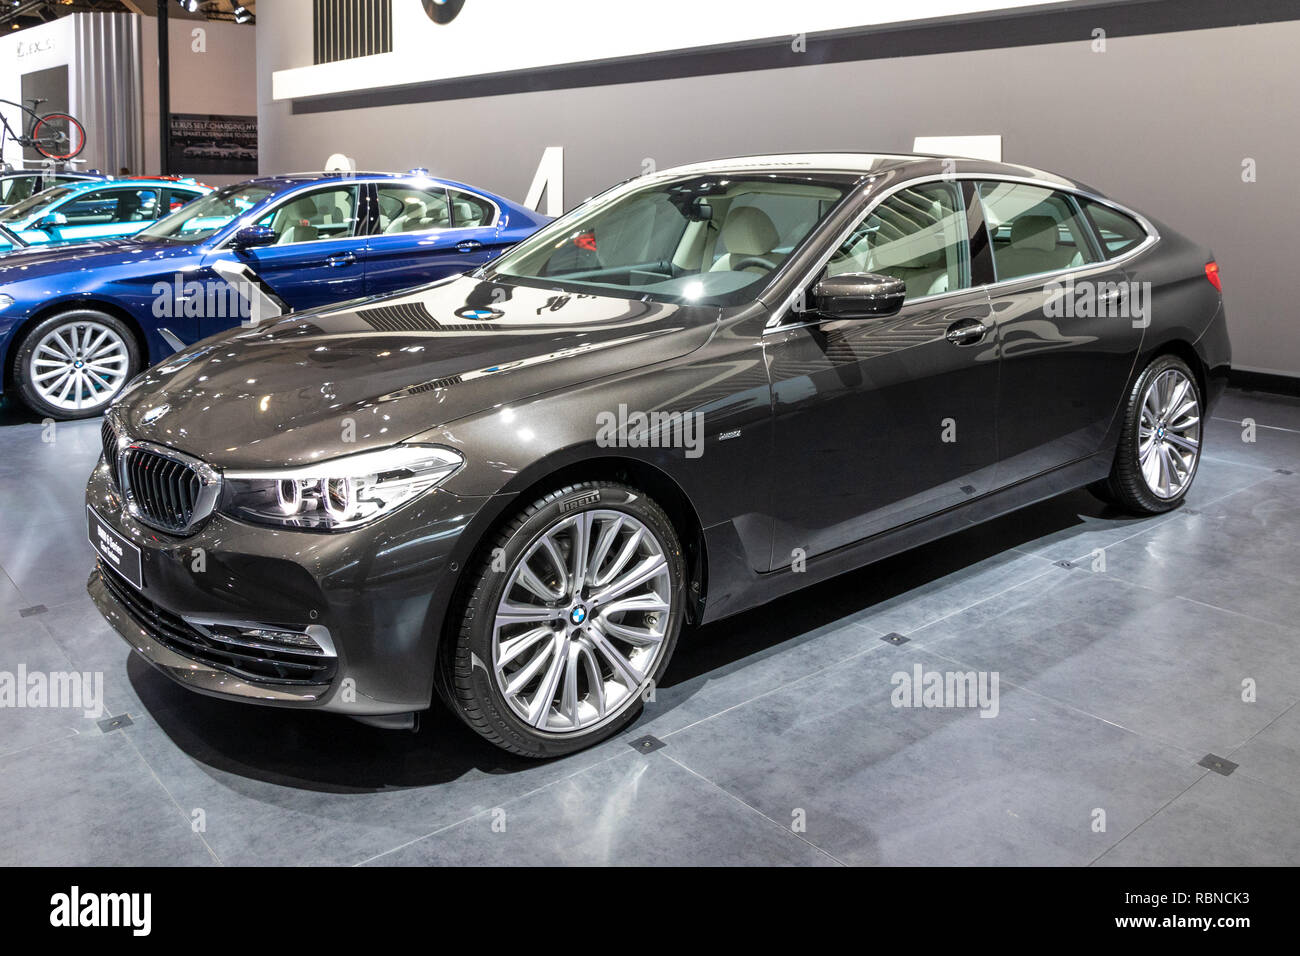 BRUSSELS - JAN 10, 2018: BMW 6 Series Gran Turismo luxury car showcased at the Brussels Expo Autosalon motor show. Stock Photo